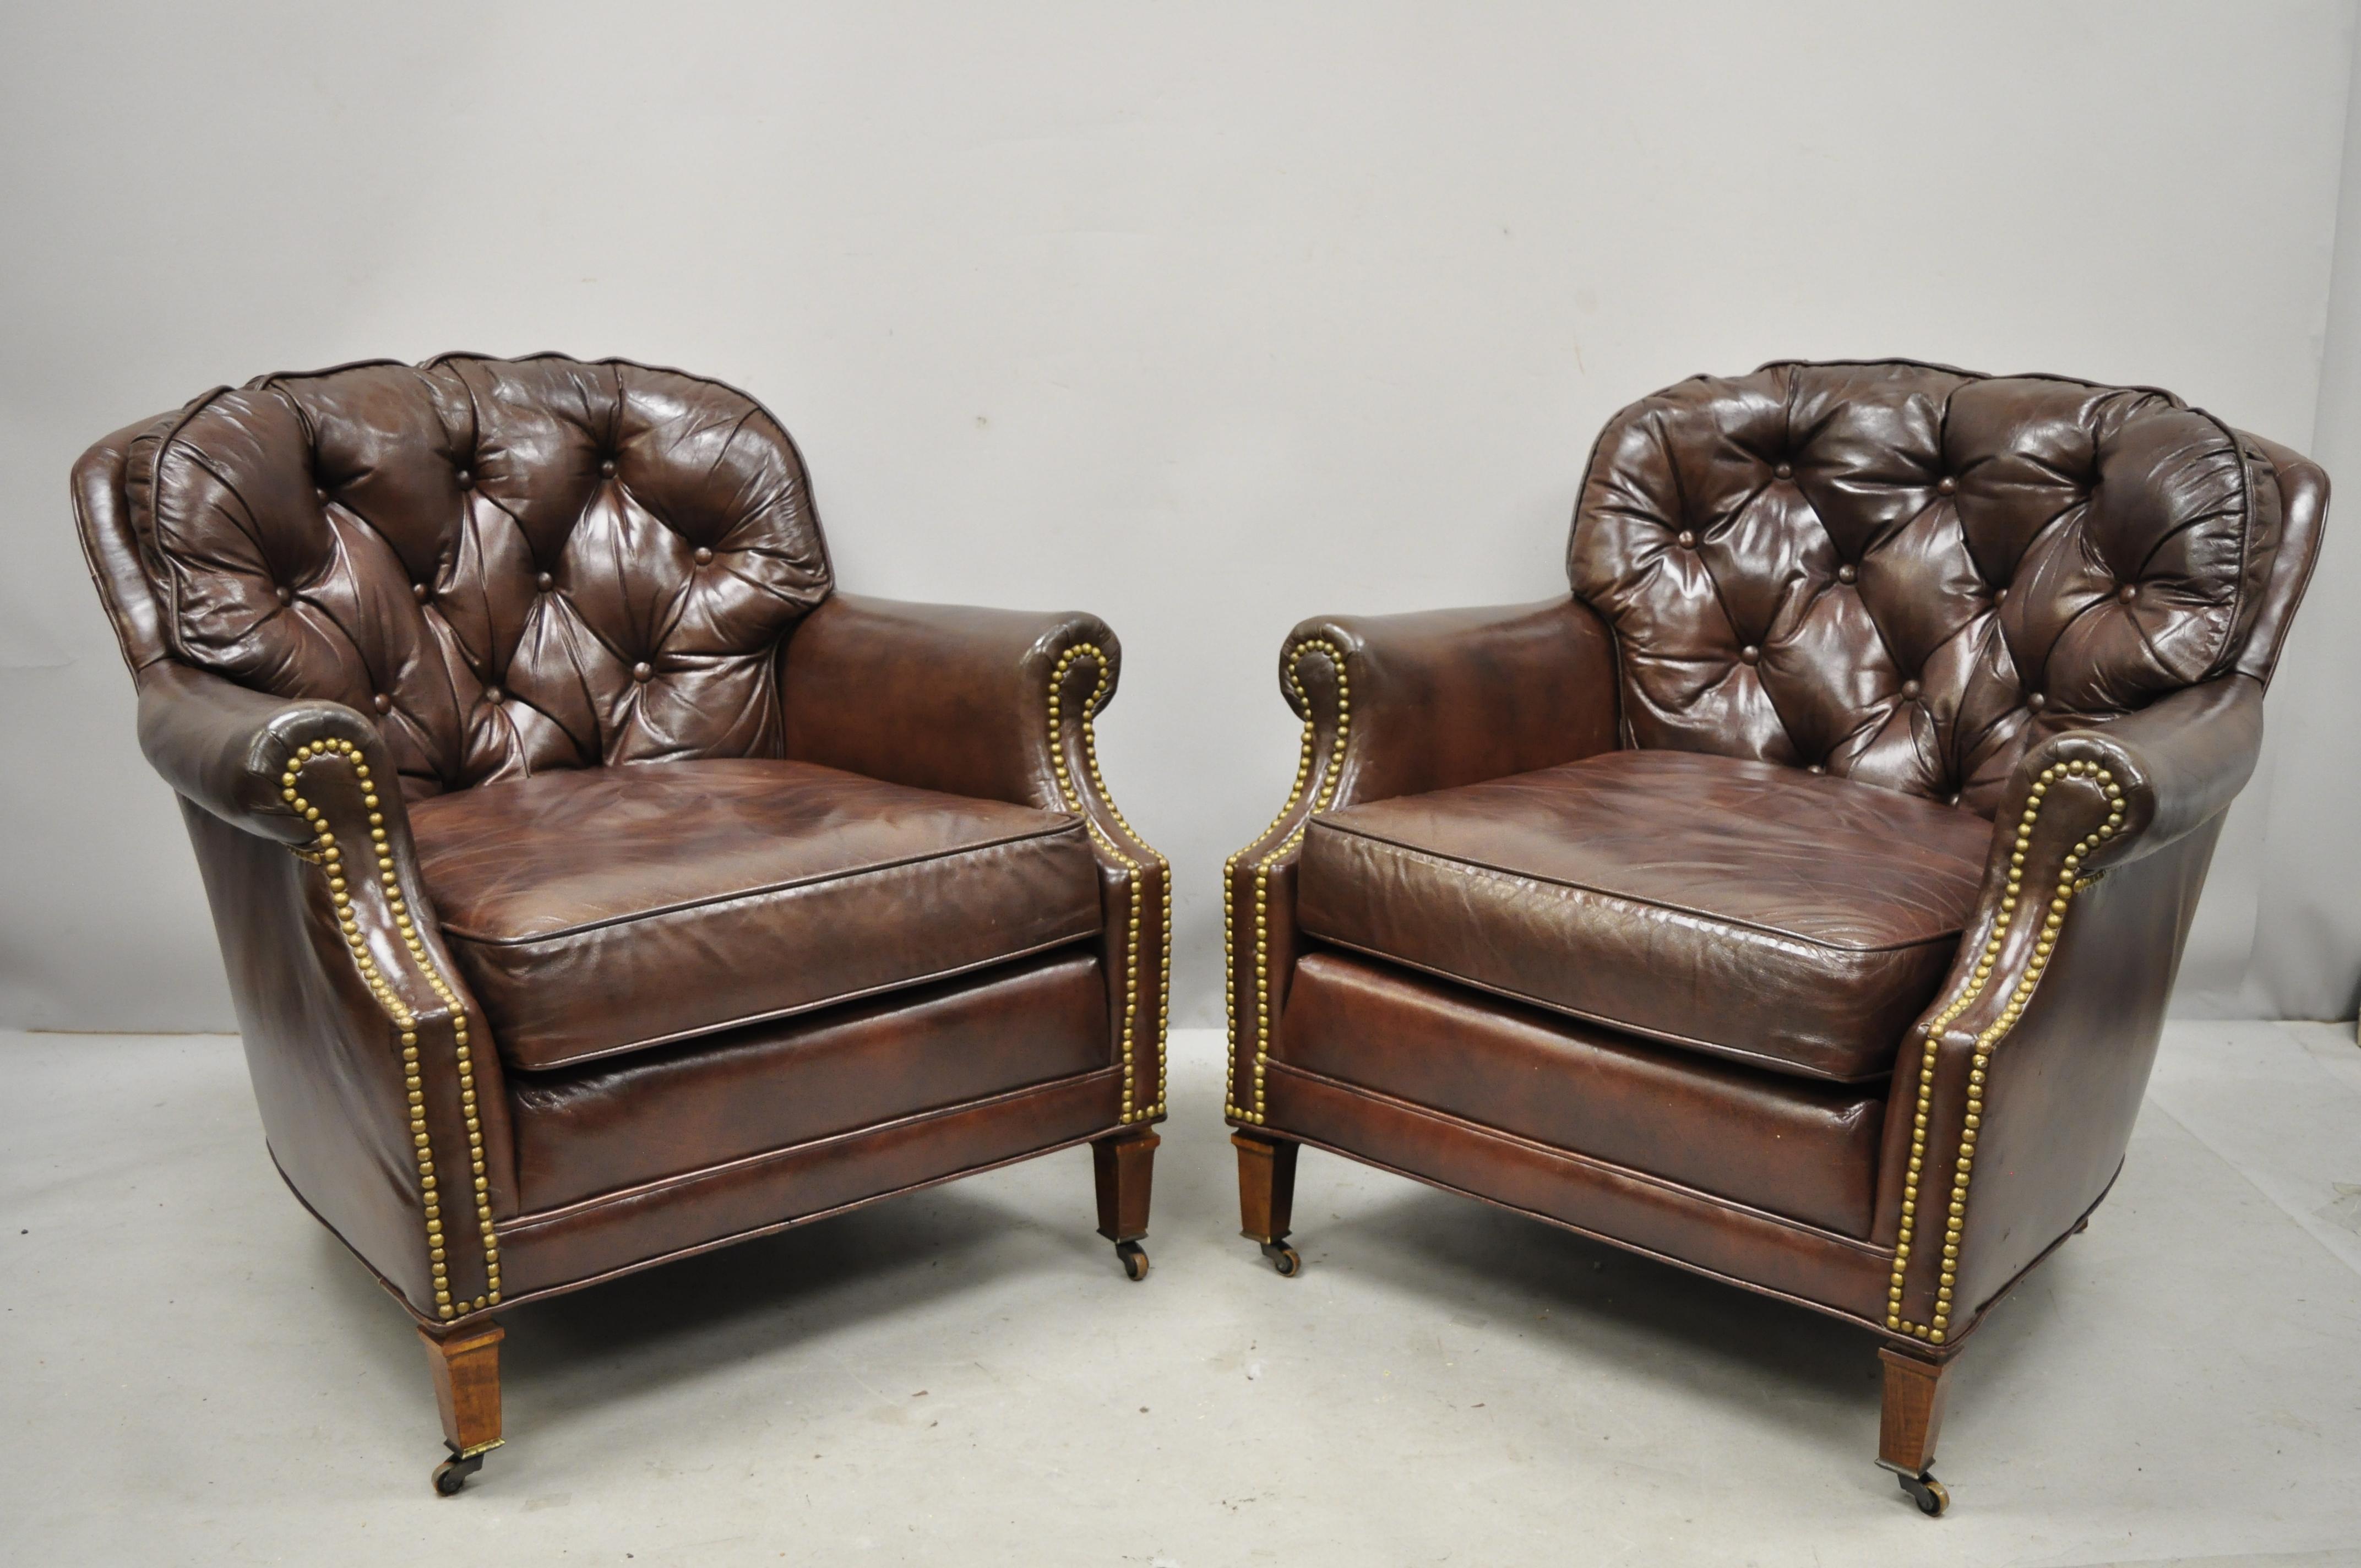 Pair of Century Furniture Co. brown leather chesterfield club lounge chairs and ottomans. Listing features (2) club chairs, (2) ottomans, rolling casters, button tufted leather upholstery, original label, quality American craftsmanship, great style